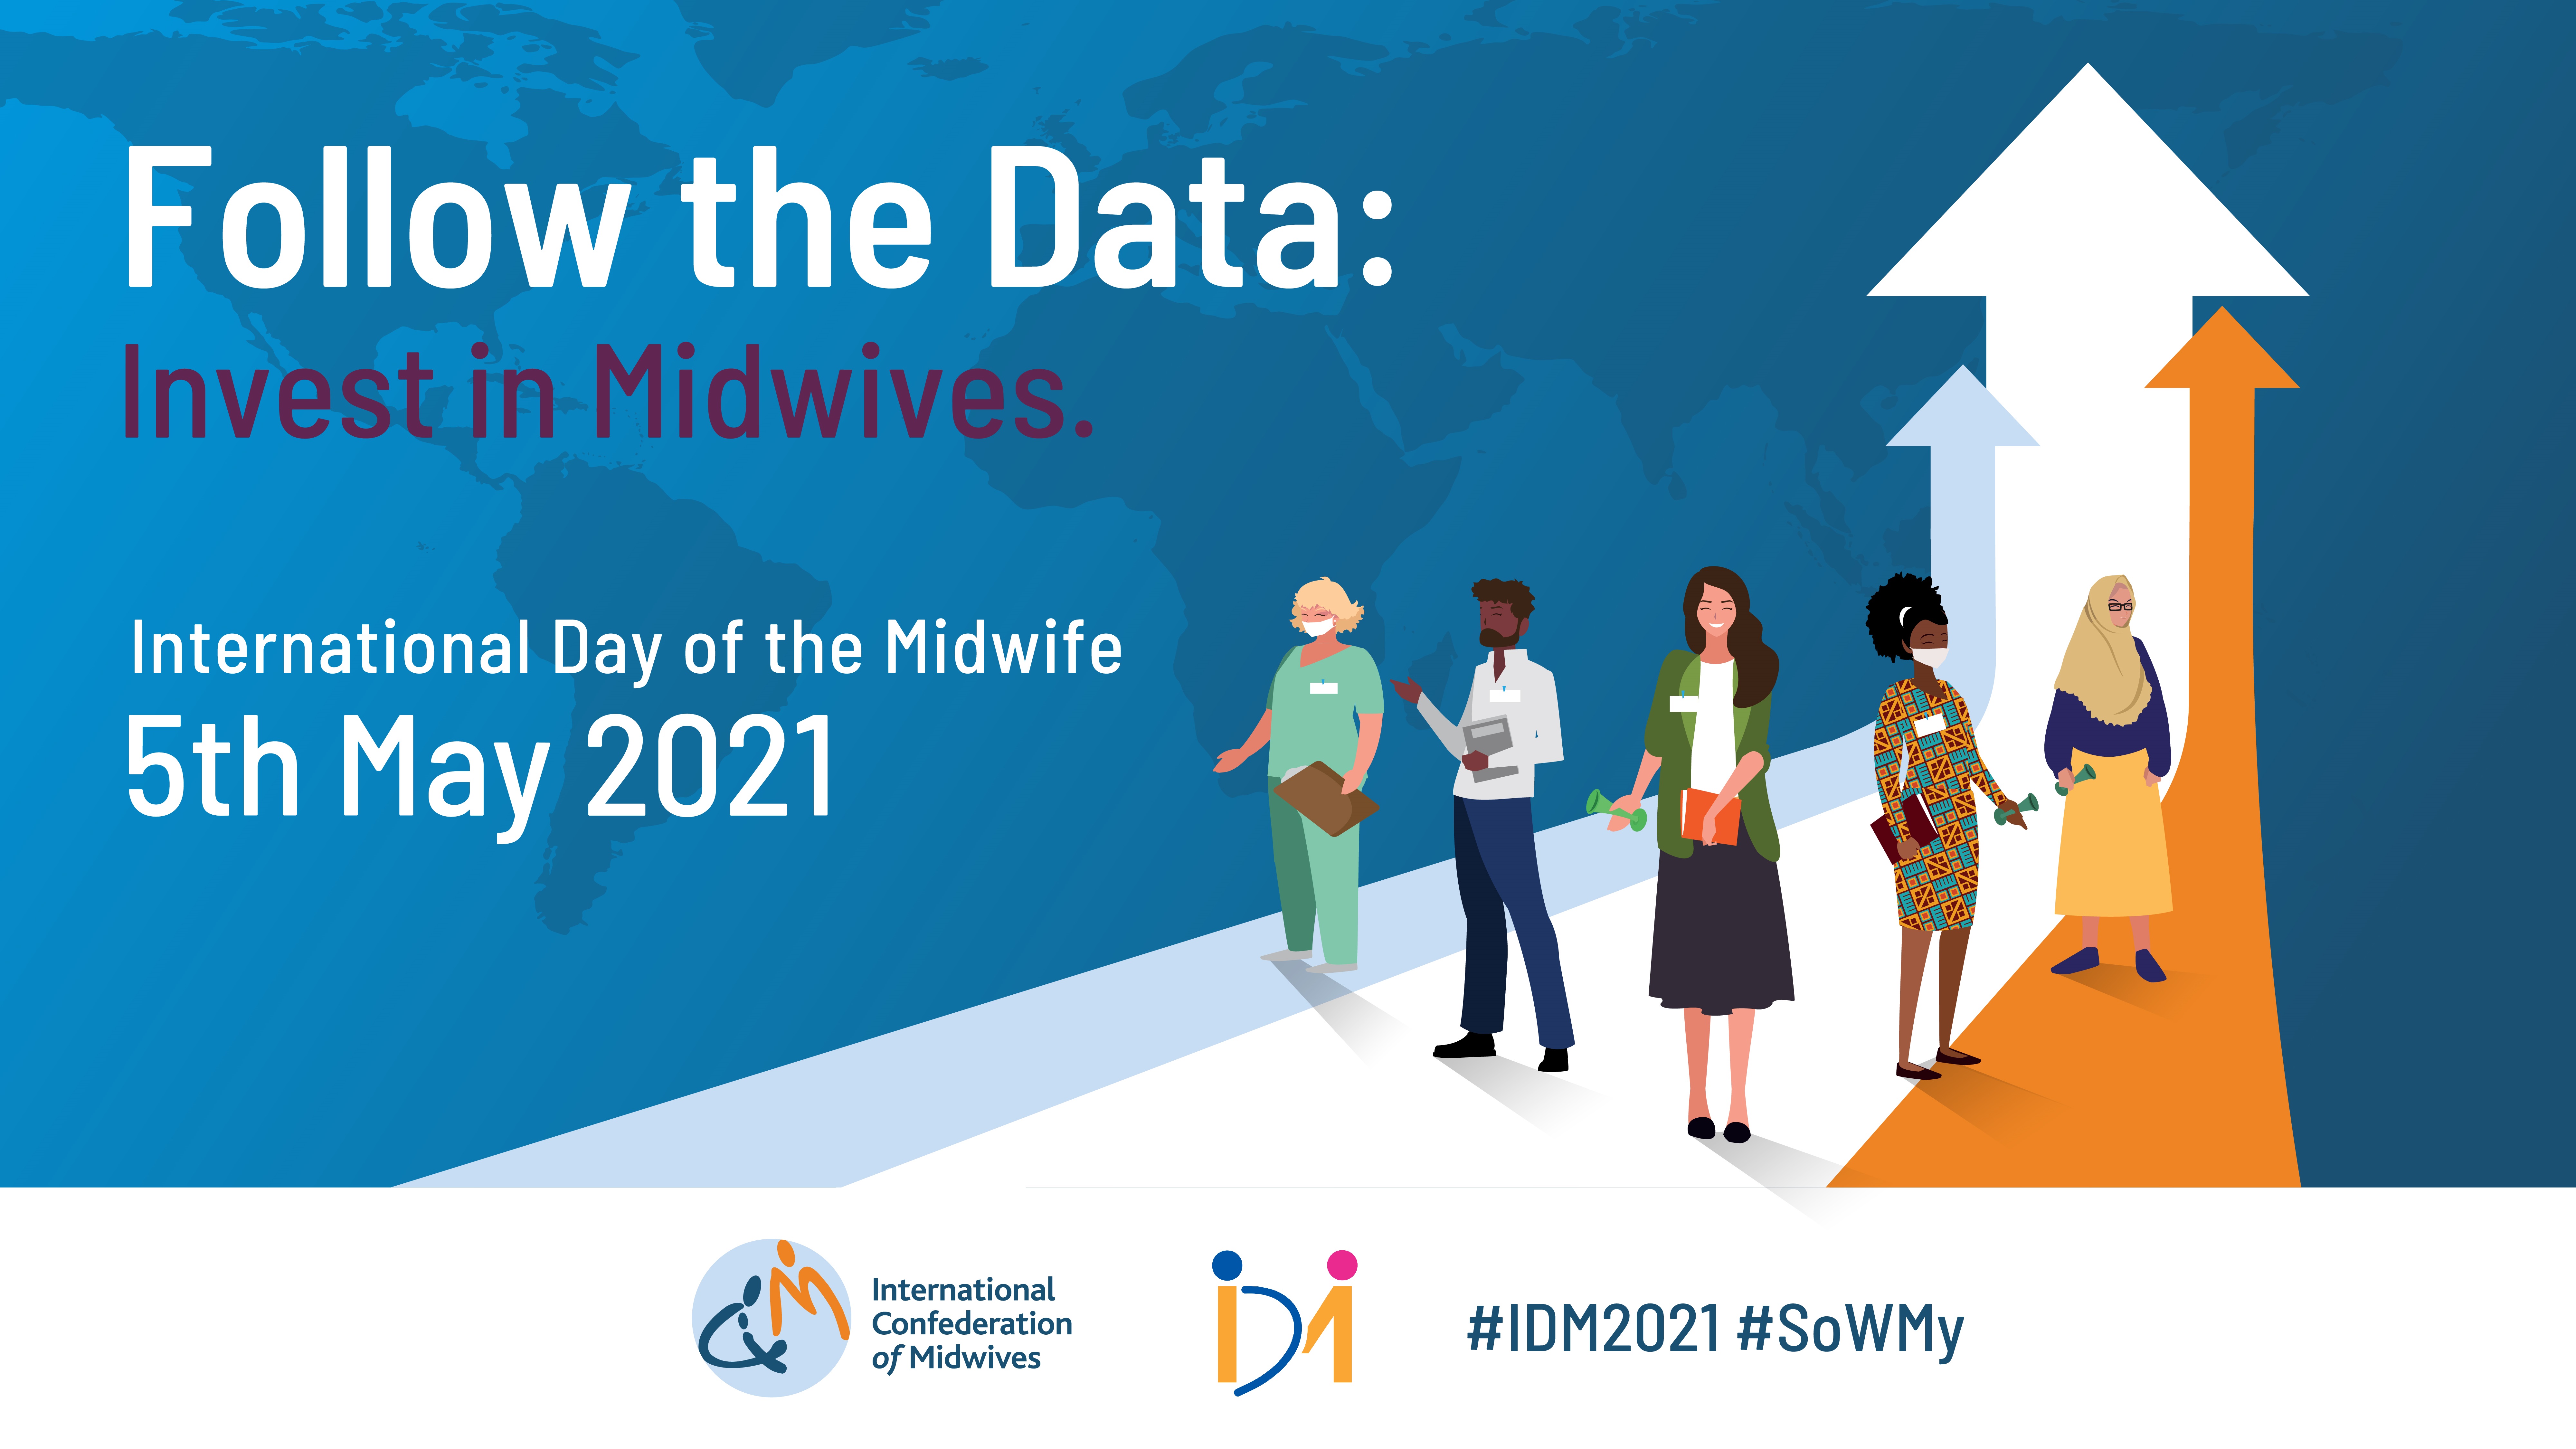 International Day of the Midwife 2021